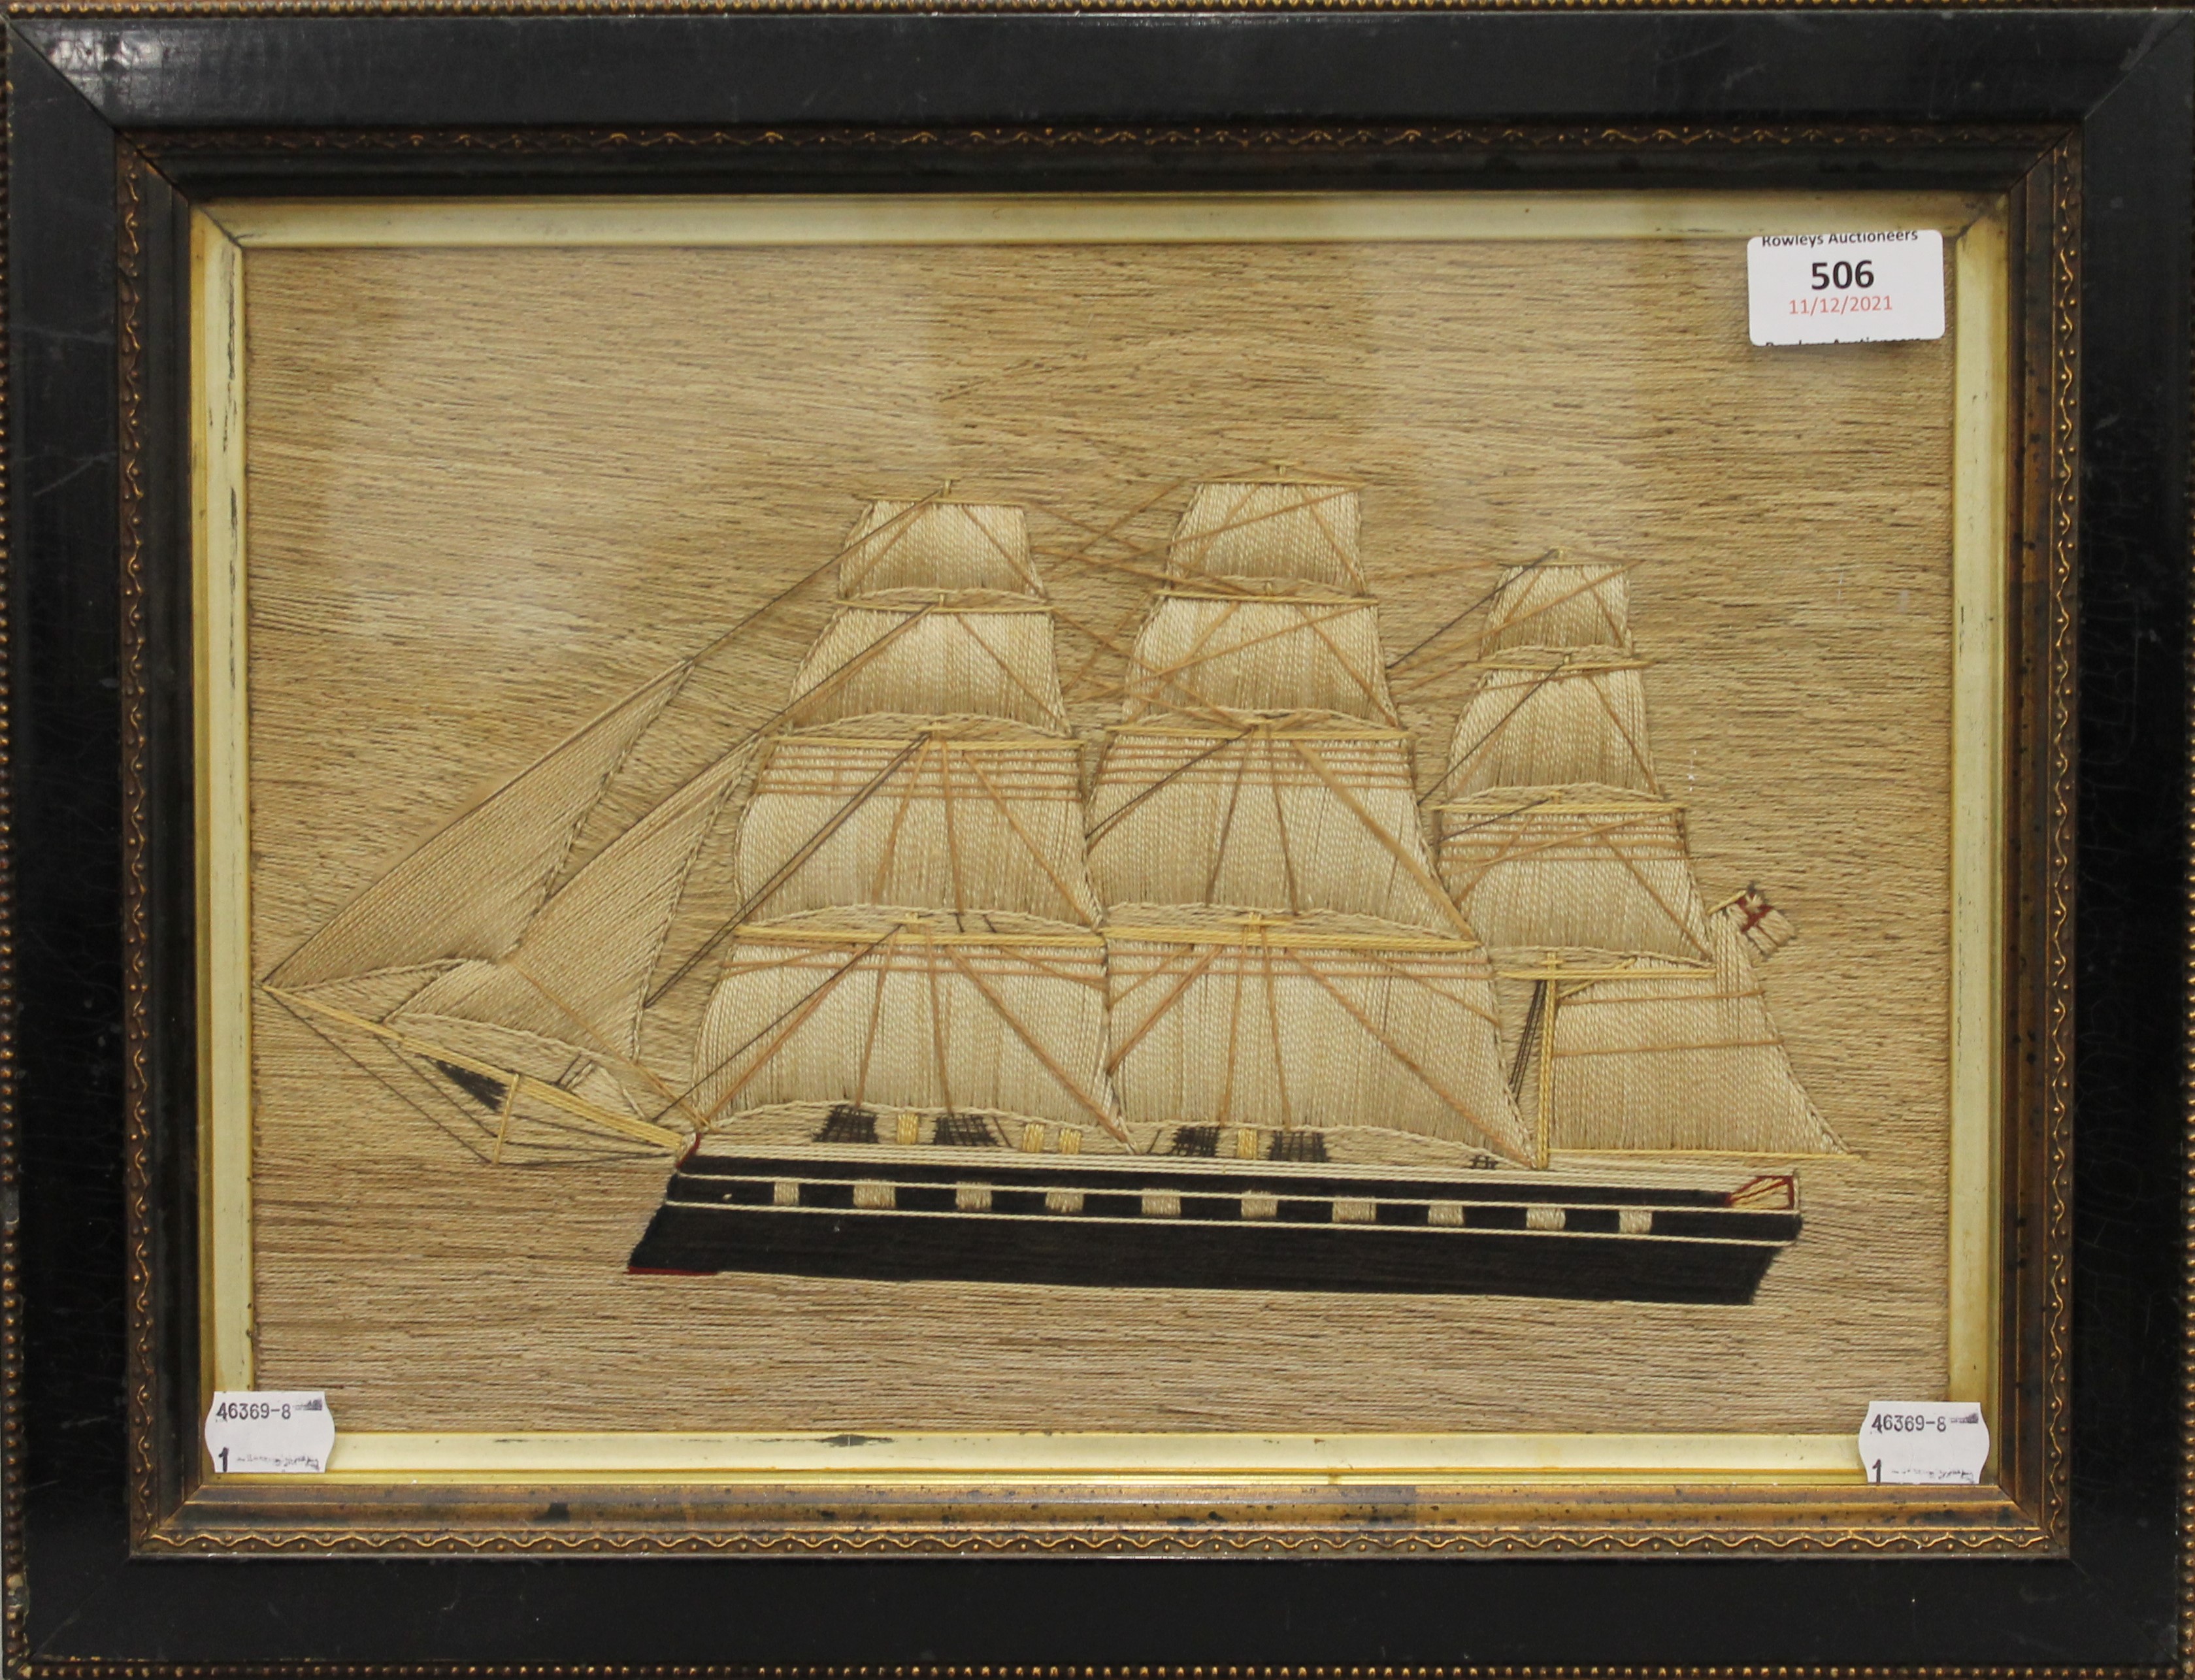 An antique sailors woolwork picture of a Sailing Ship, framed and glazed. 43 x 33 cm overall. - Image 2 of 2